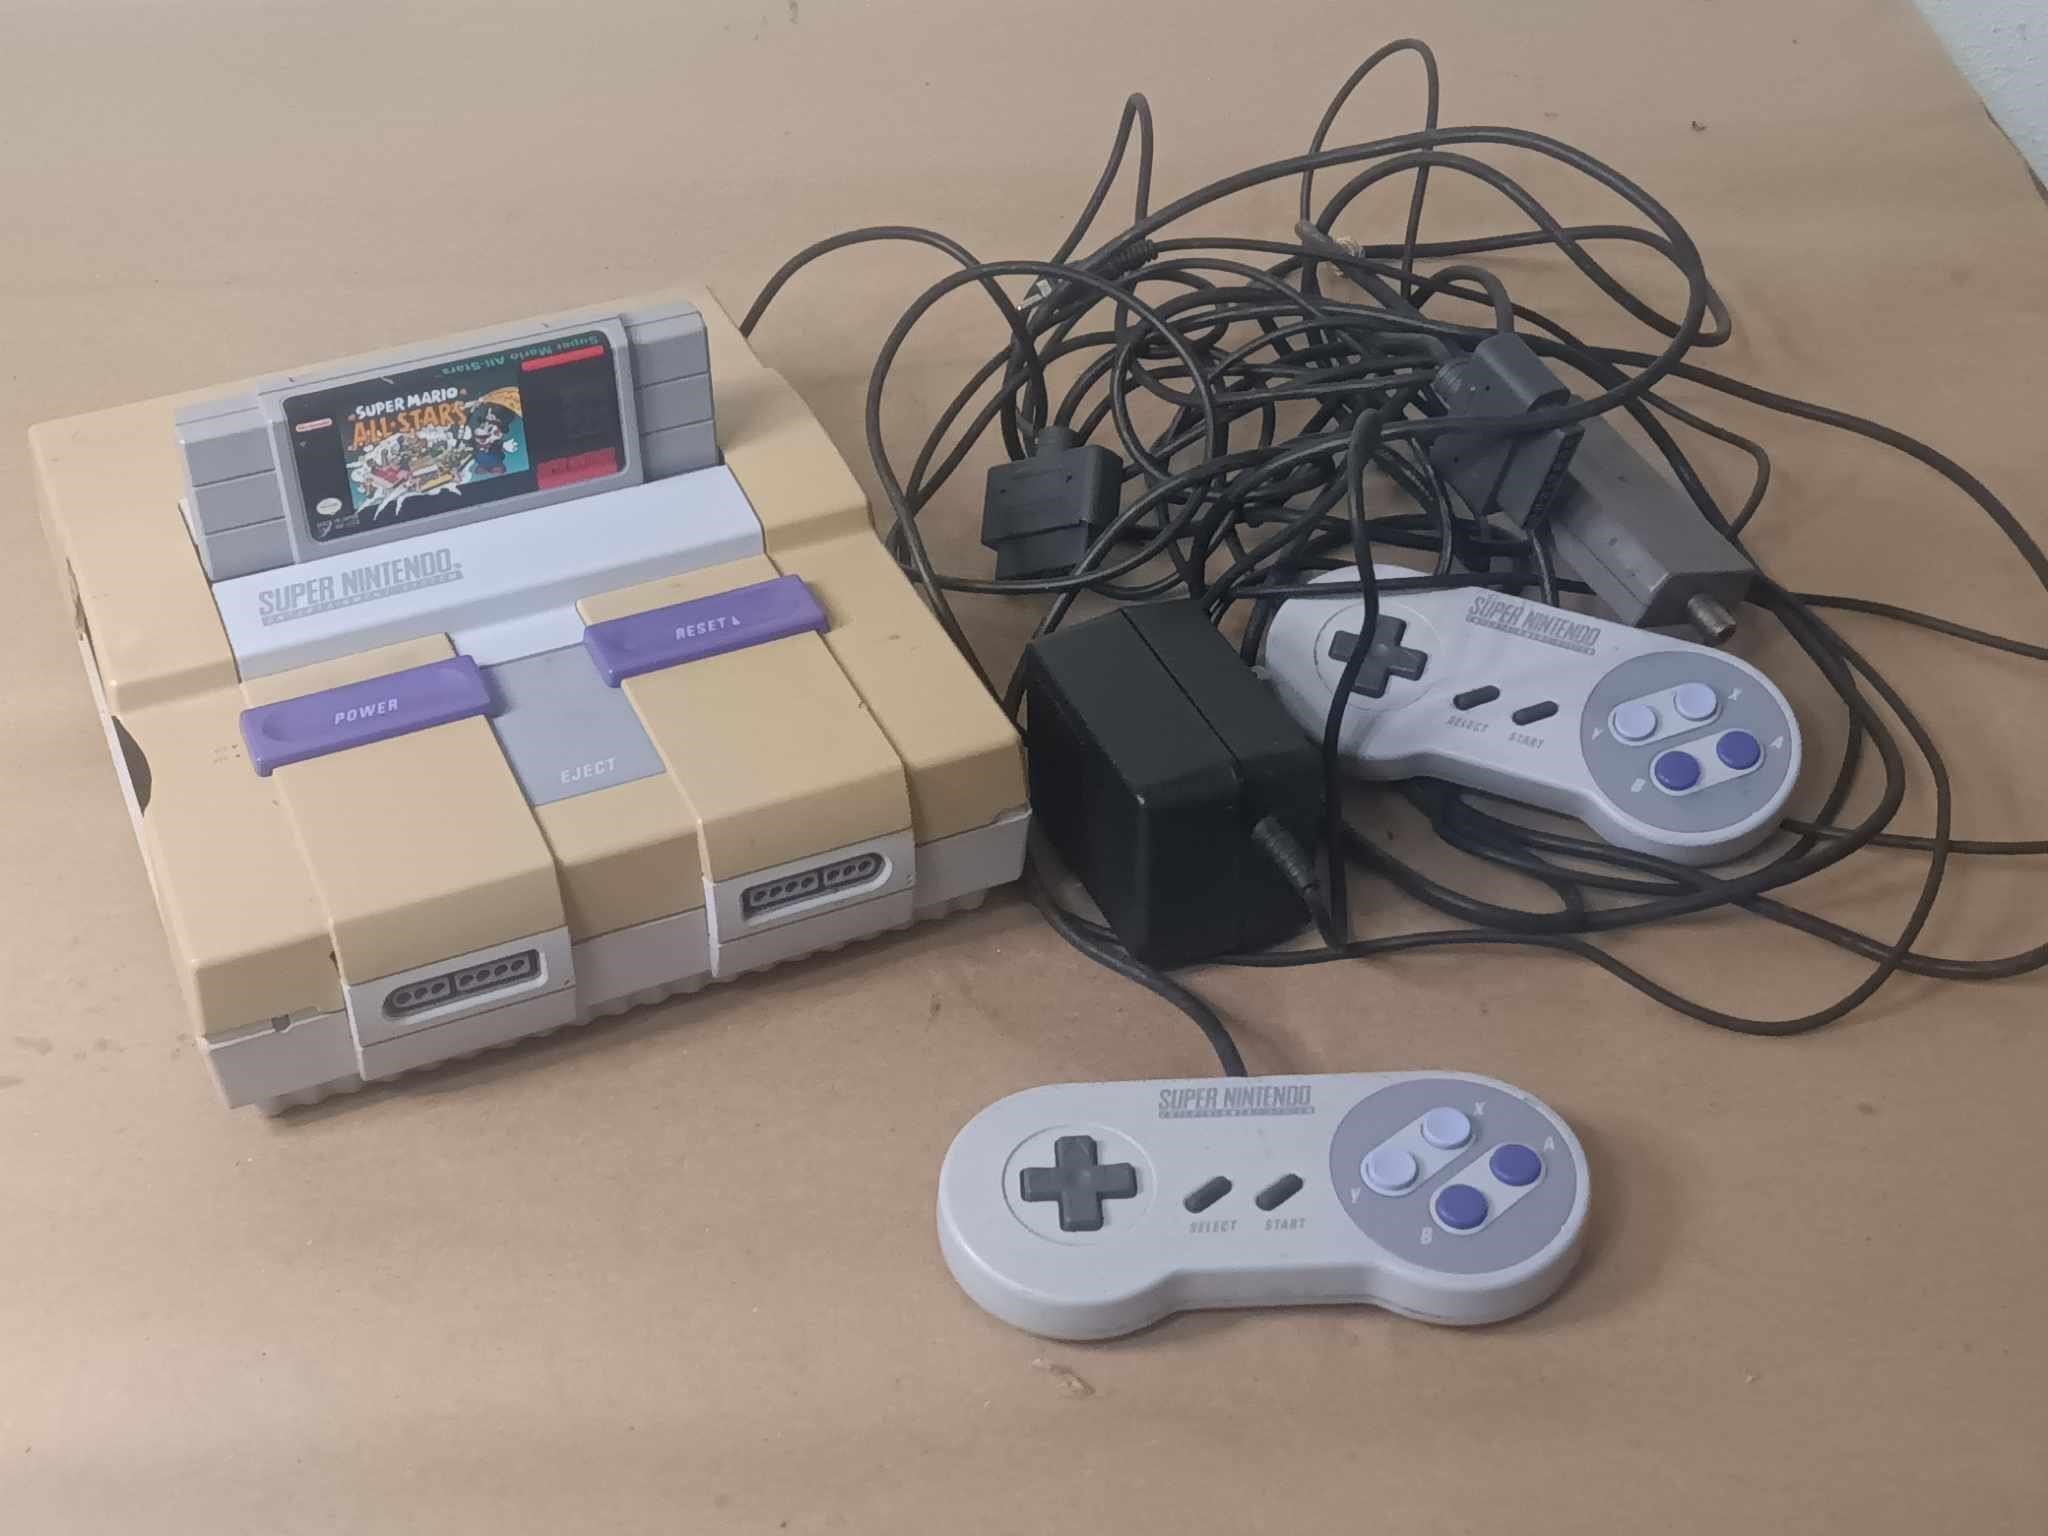 SUPER NINTENDO DOES HAVE DAMAGE TO THE CASE